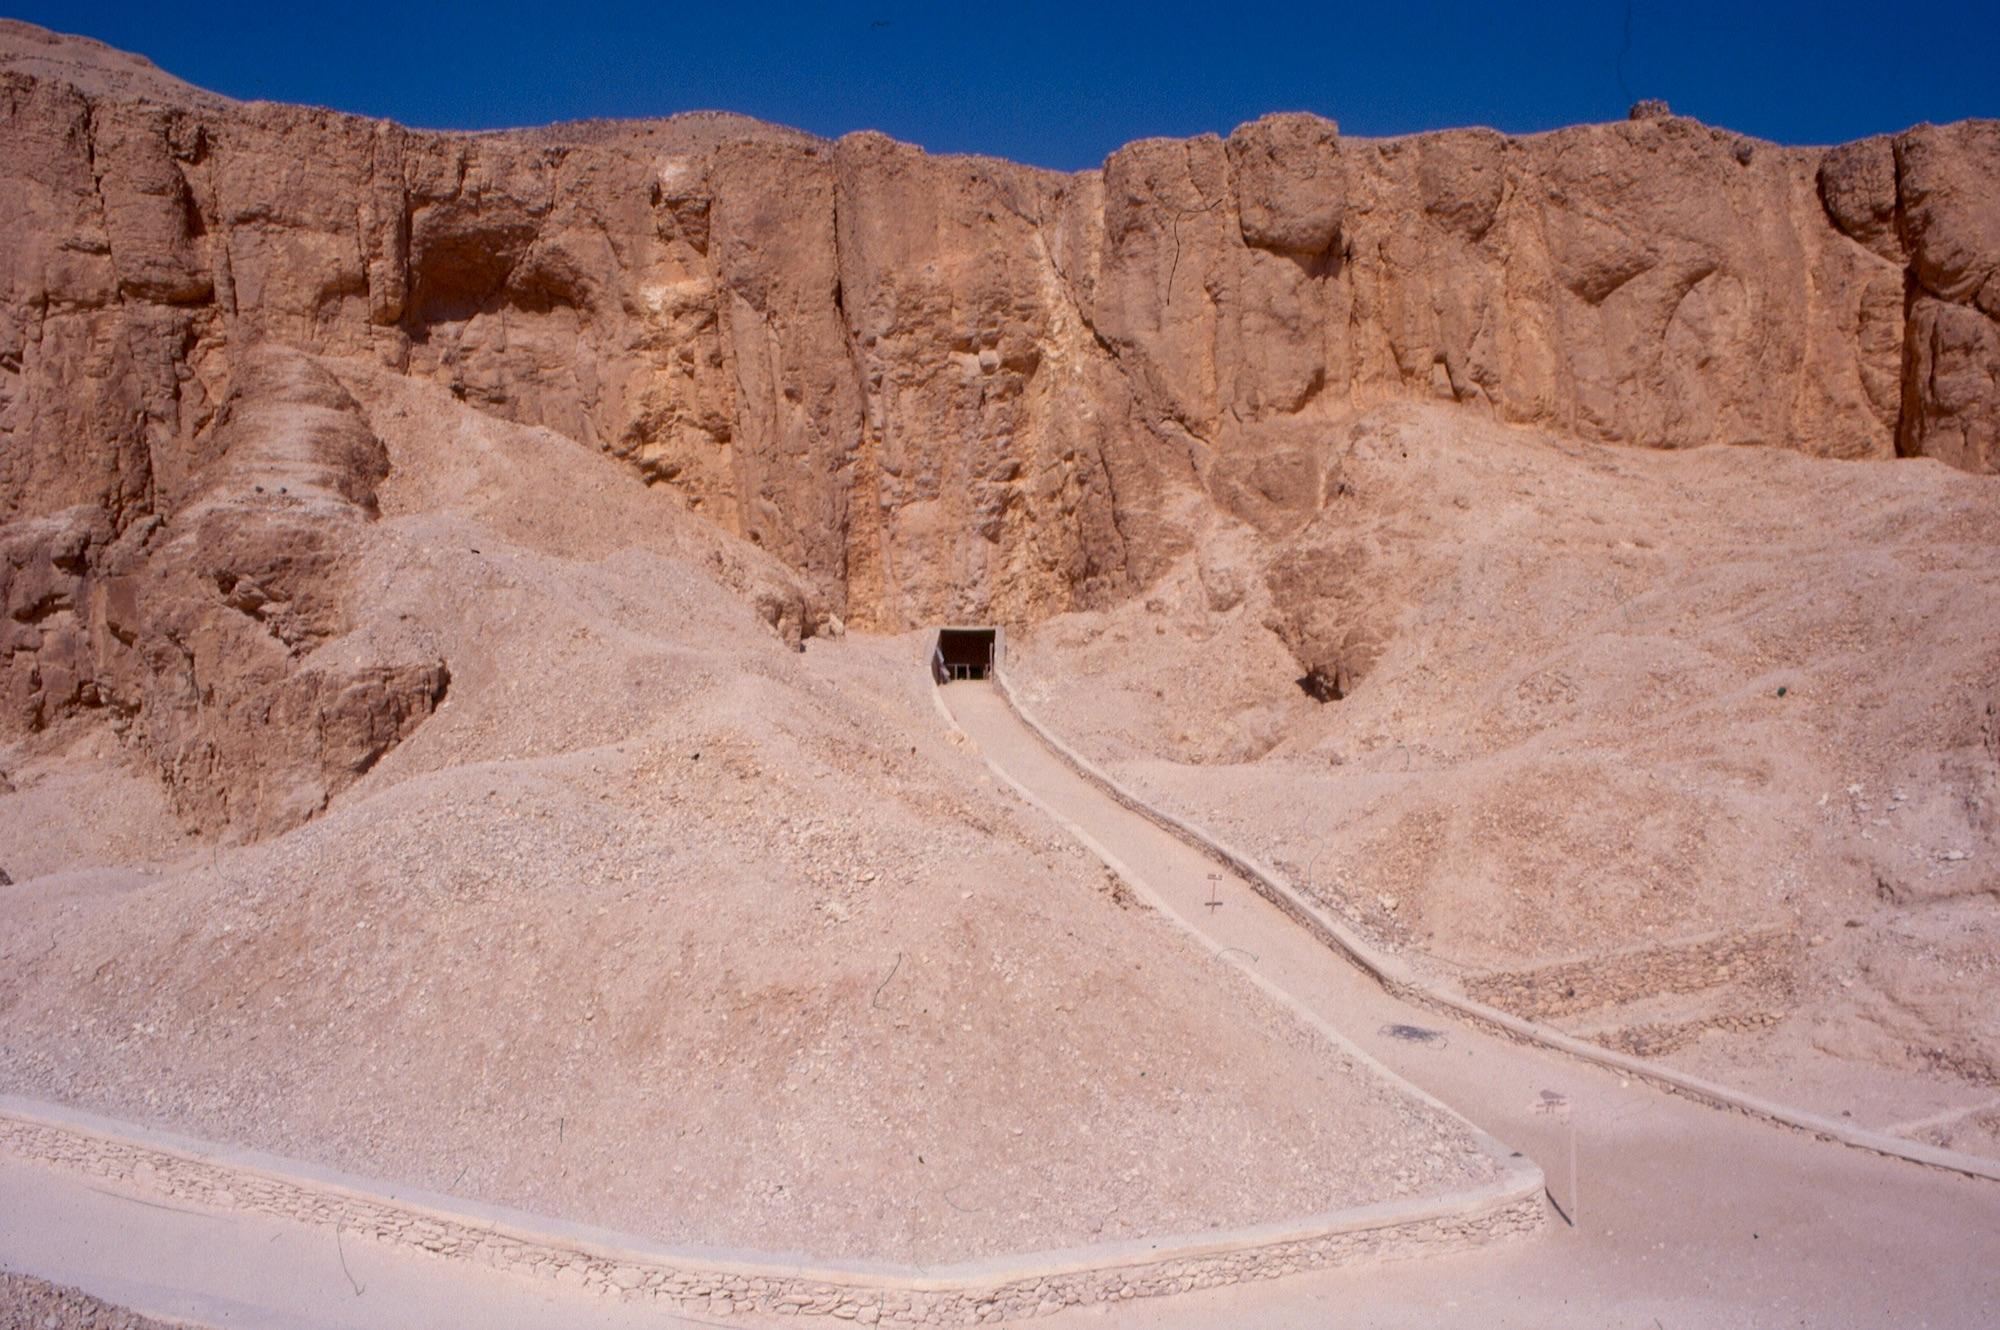 Tomb entrance at base of cliff with approach path.